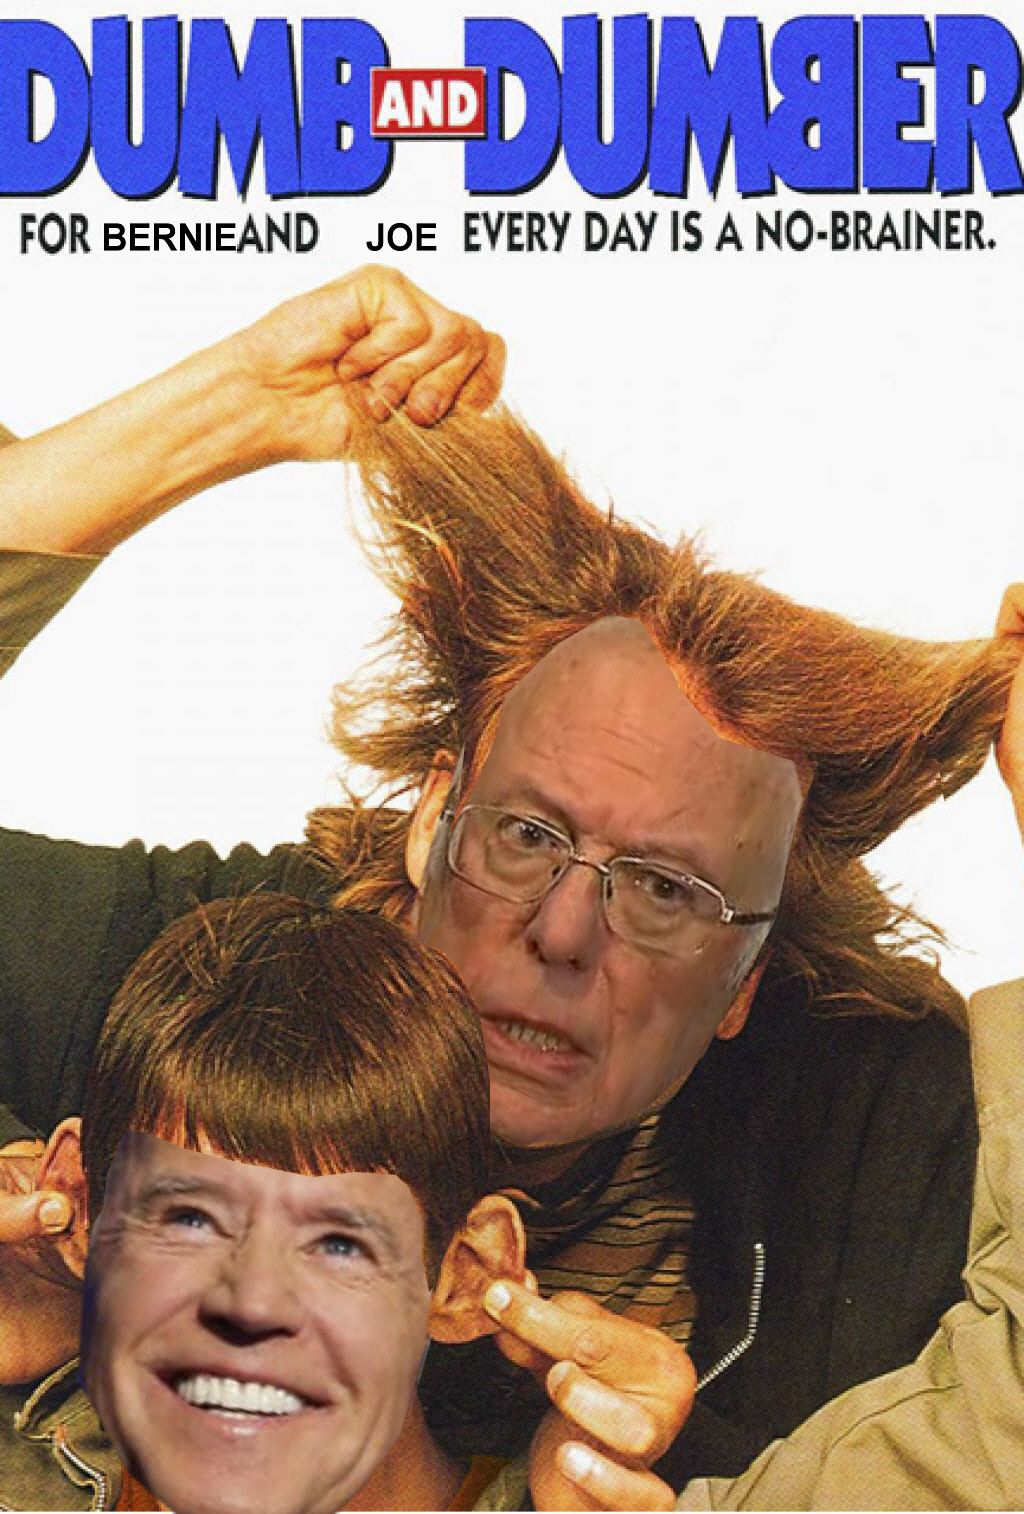 dumb and dumber - DumbDummer And For Bernieand Joe Every Day Is A NoBrainer.